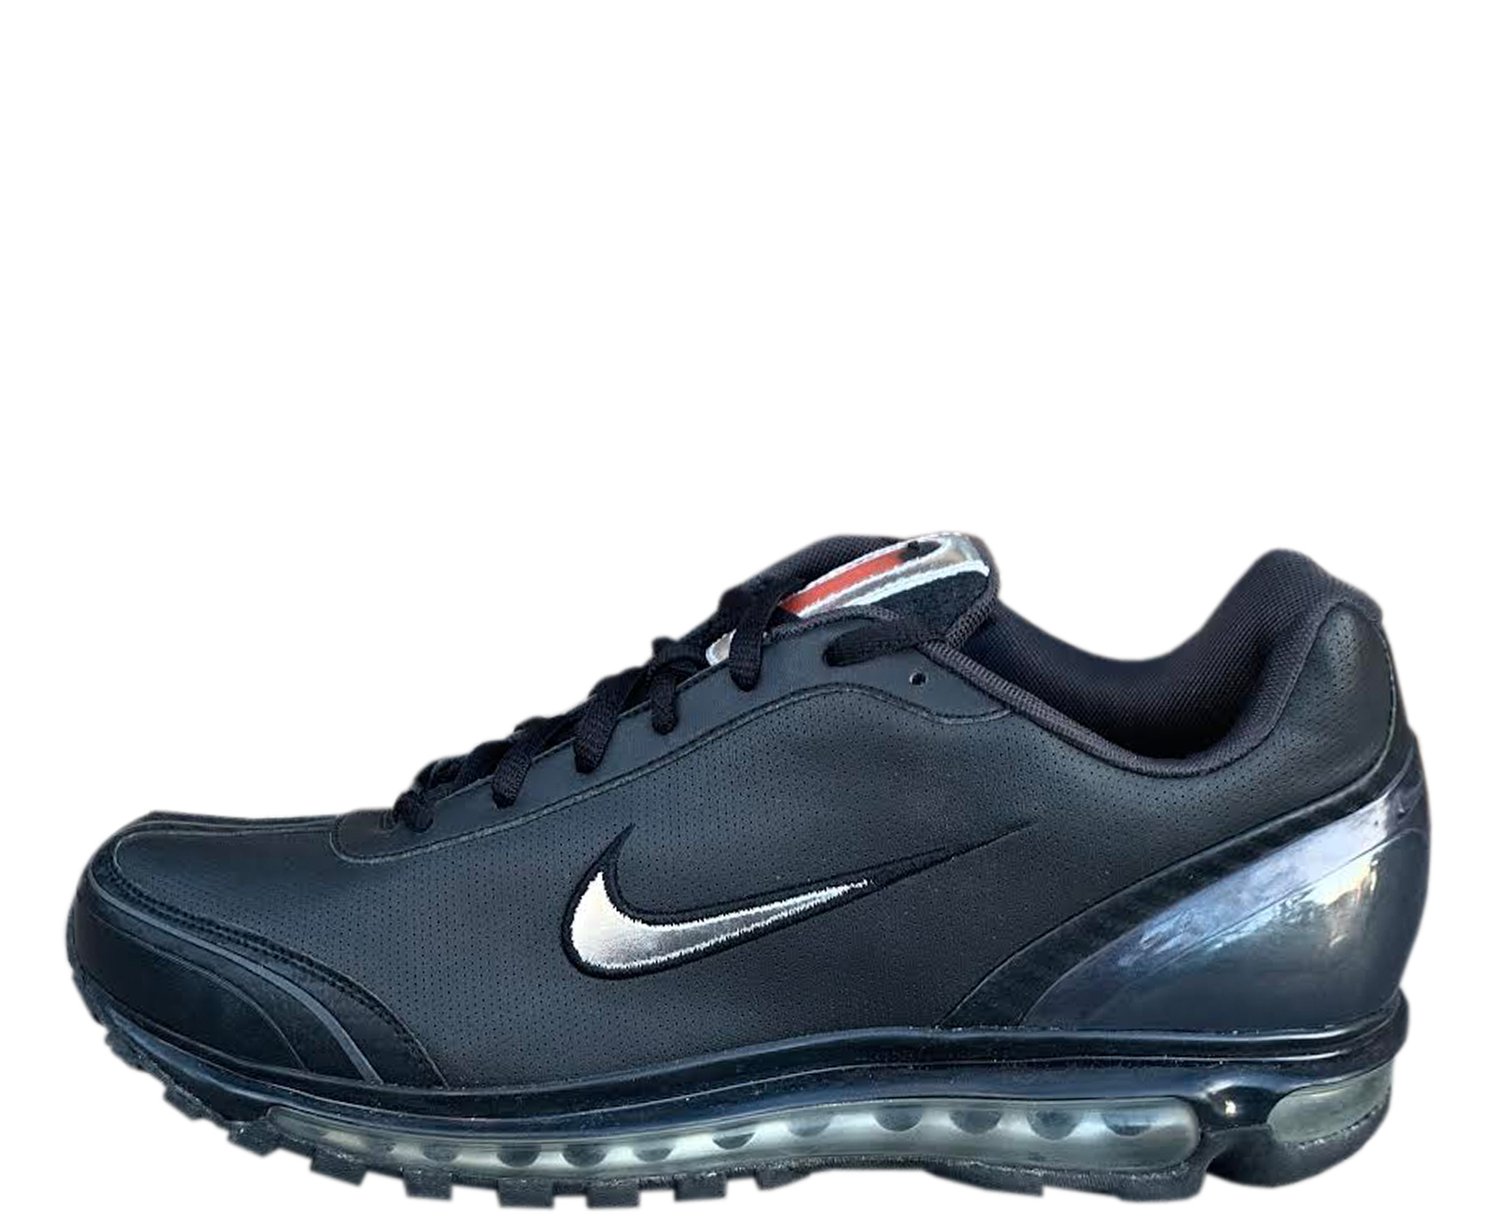 Nike Air Max 2004 Black / Red / Metallic Silver / Carbon (Size 9) "Sample Unreleased" — Roots